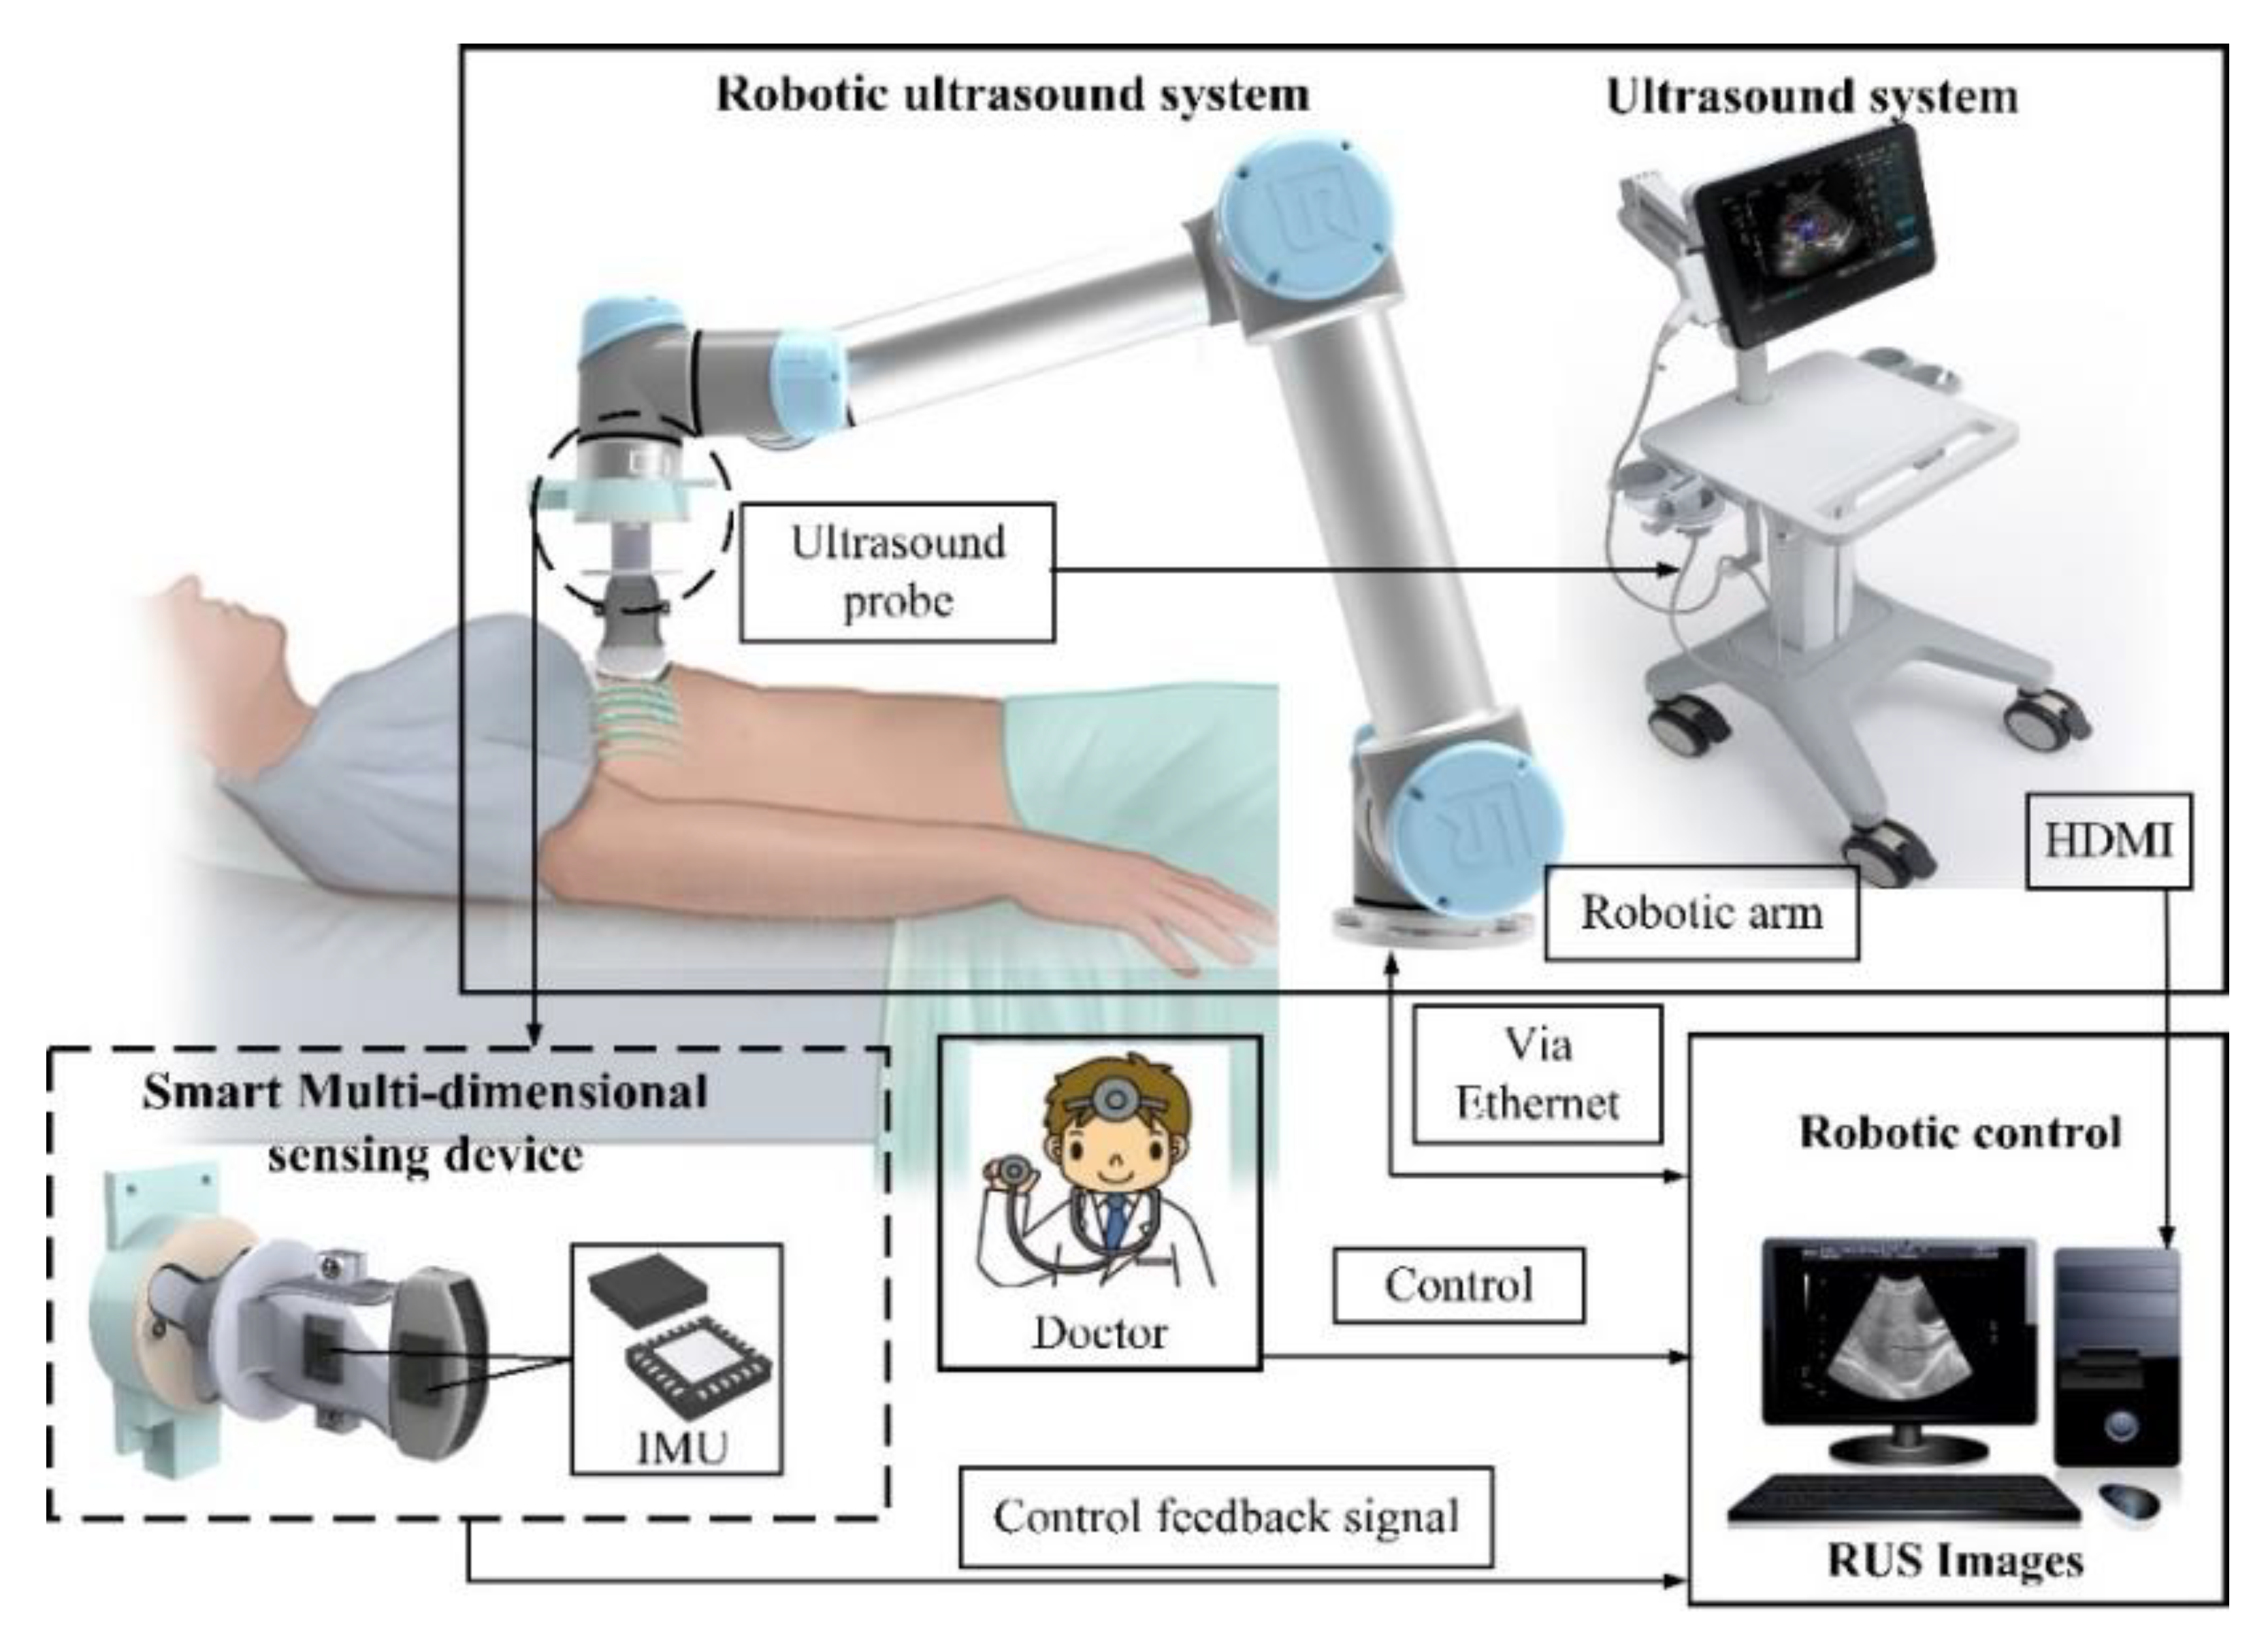 Sensors | Free Full-Text | An Improved Sensing Method of a Robotic  Ultrasound System for Real-Time Force and Angle Calibration | HTML